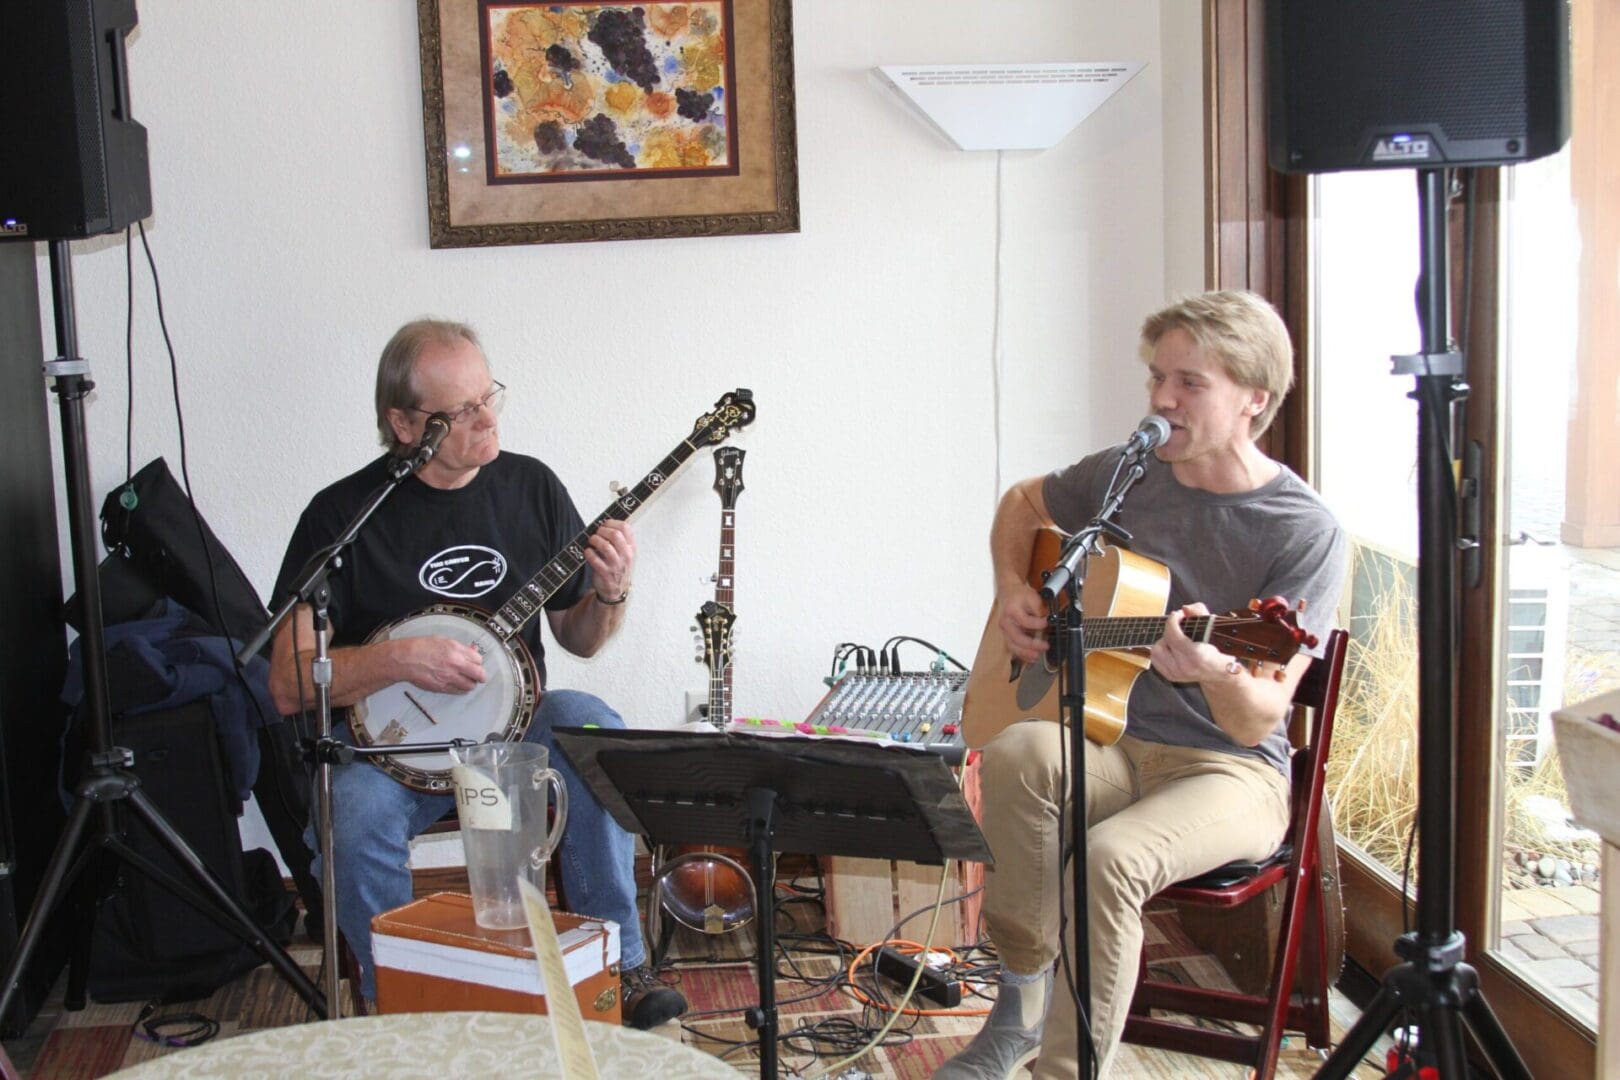 Two men playing music in a living room.